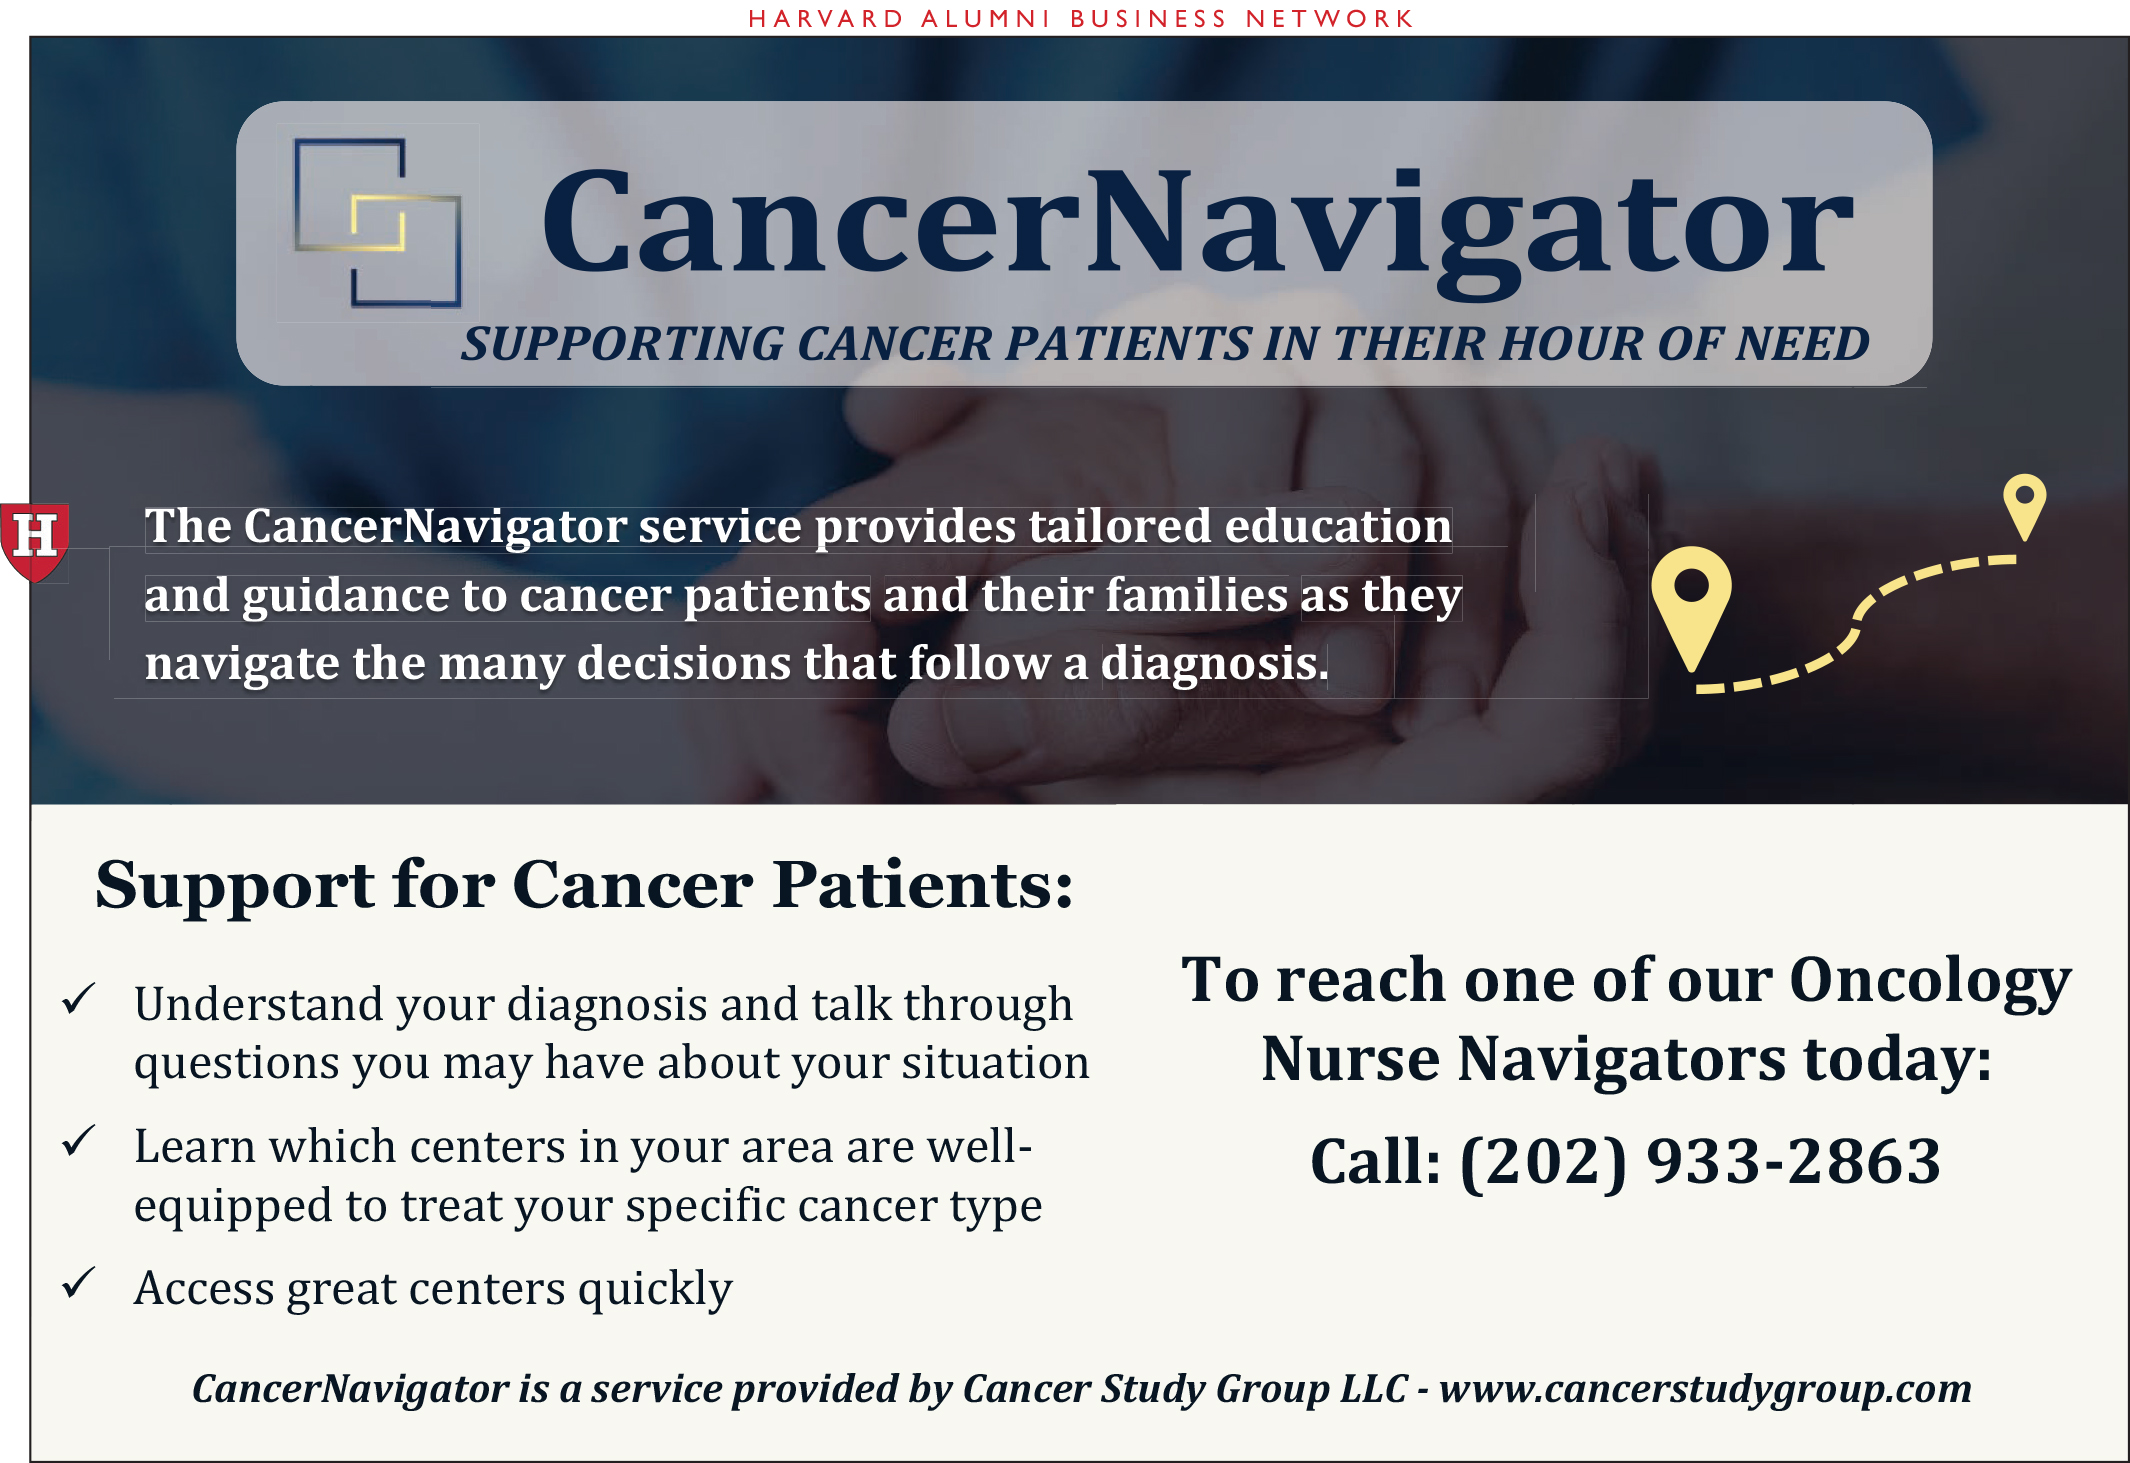 Cancer Navigator. Supporting Cancer Patients in their hour of need. 